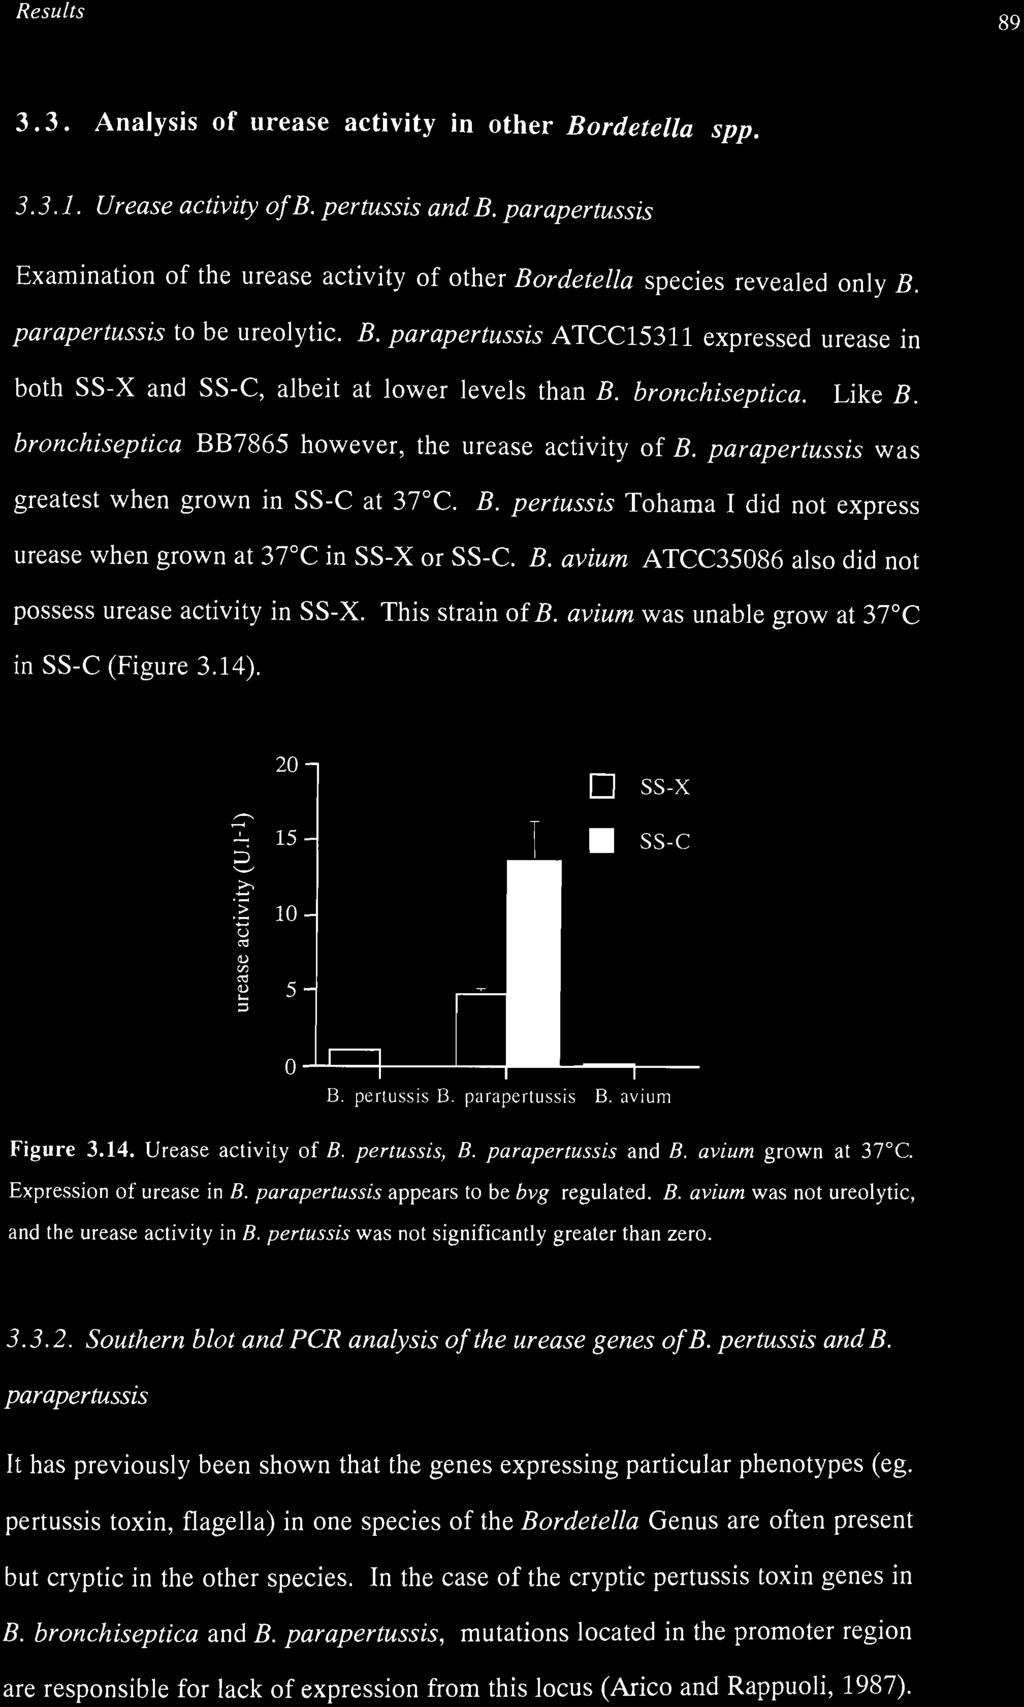 bronchiseptica. Like B. bronchiseptica BB7865 however, the urease activity of B. parapertussis was greatest when grown in SS-C at 37 C. B. pertussis Tohama I did not express urease when grown at 37 C in SS-X or SS-C.